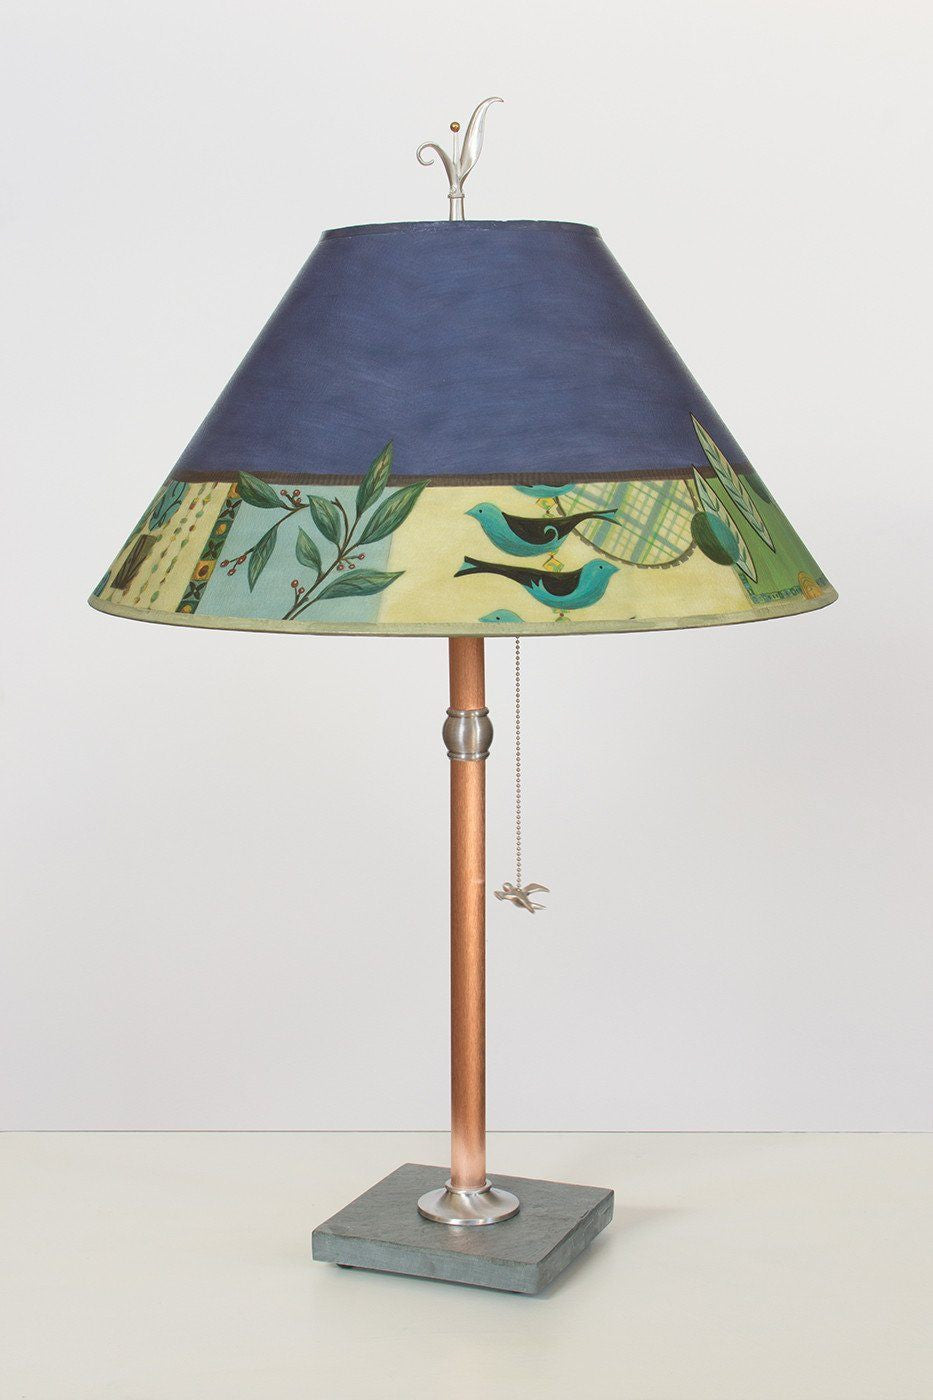 Janna Ugone &amp; Co Table Lamps Copper Table Lamp with Large Conical Shade in New Capri Periwinkle